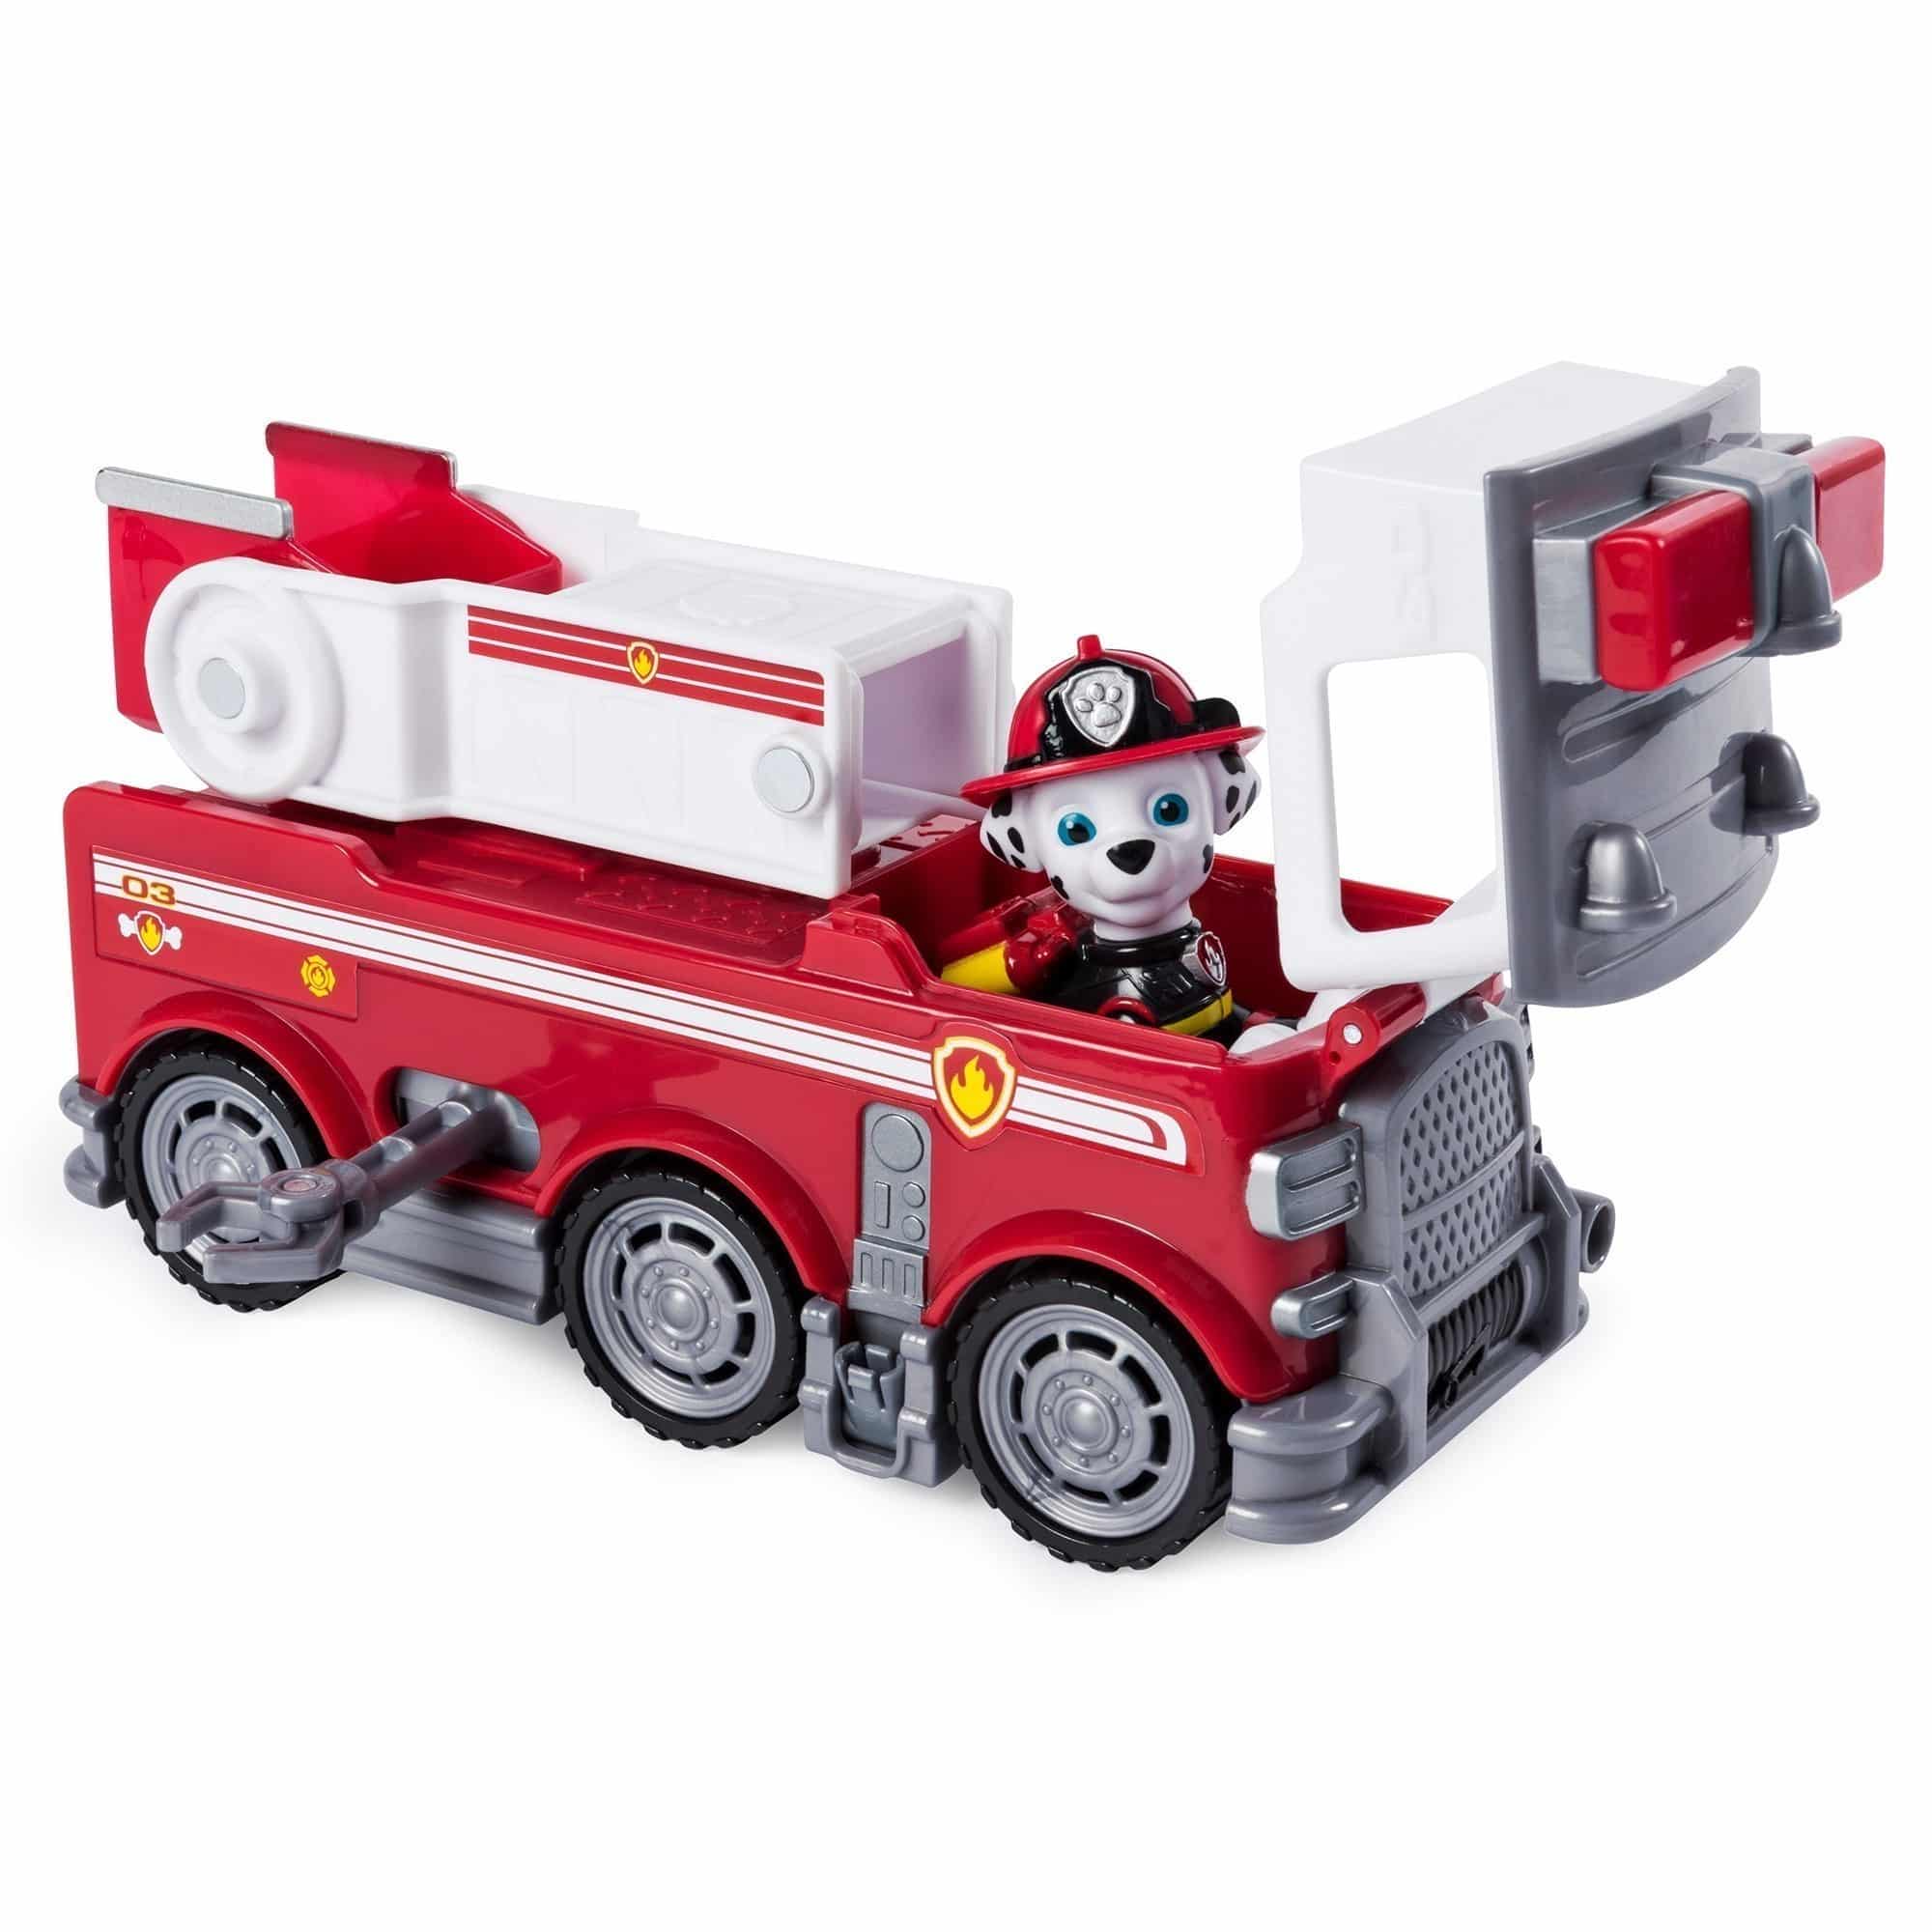 Nickelodeon - Paw Patrol Ultimate Rescue - Marshall Fire Truck